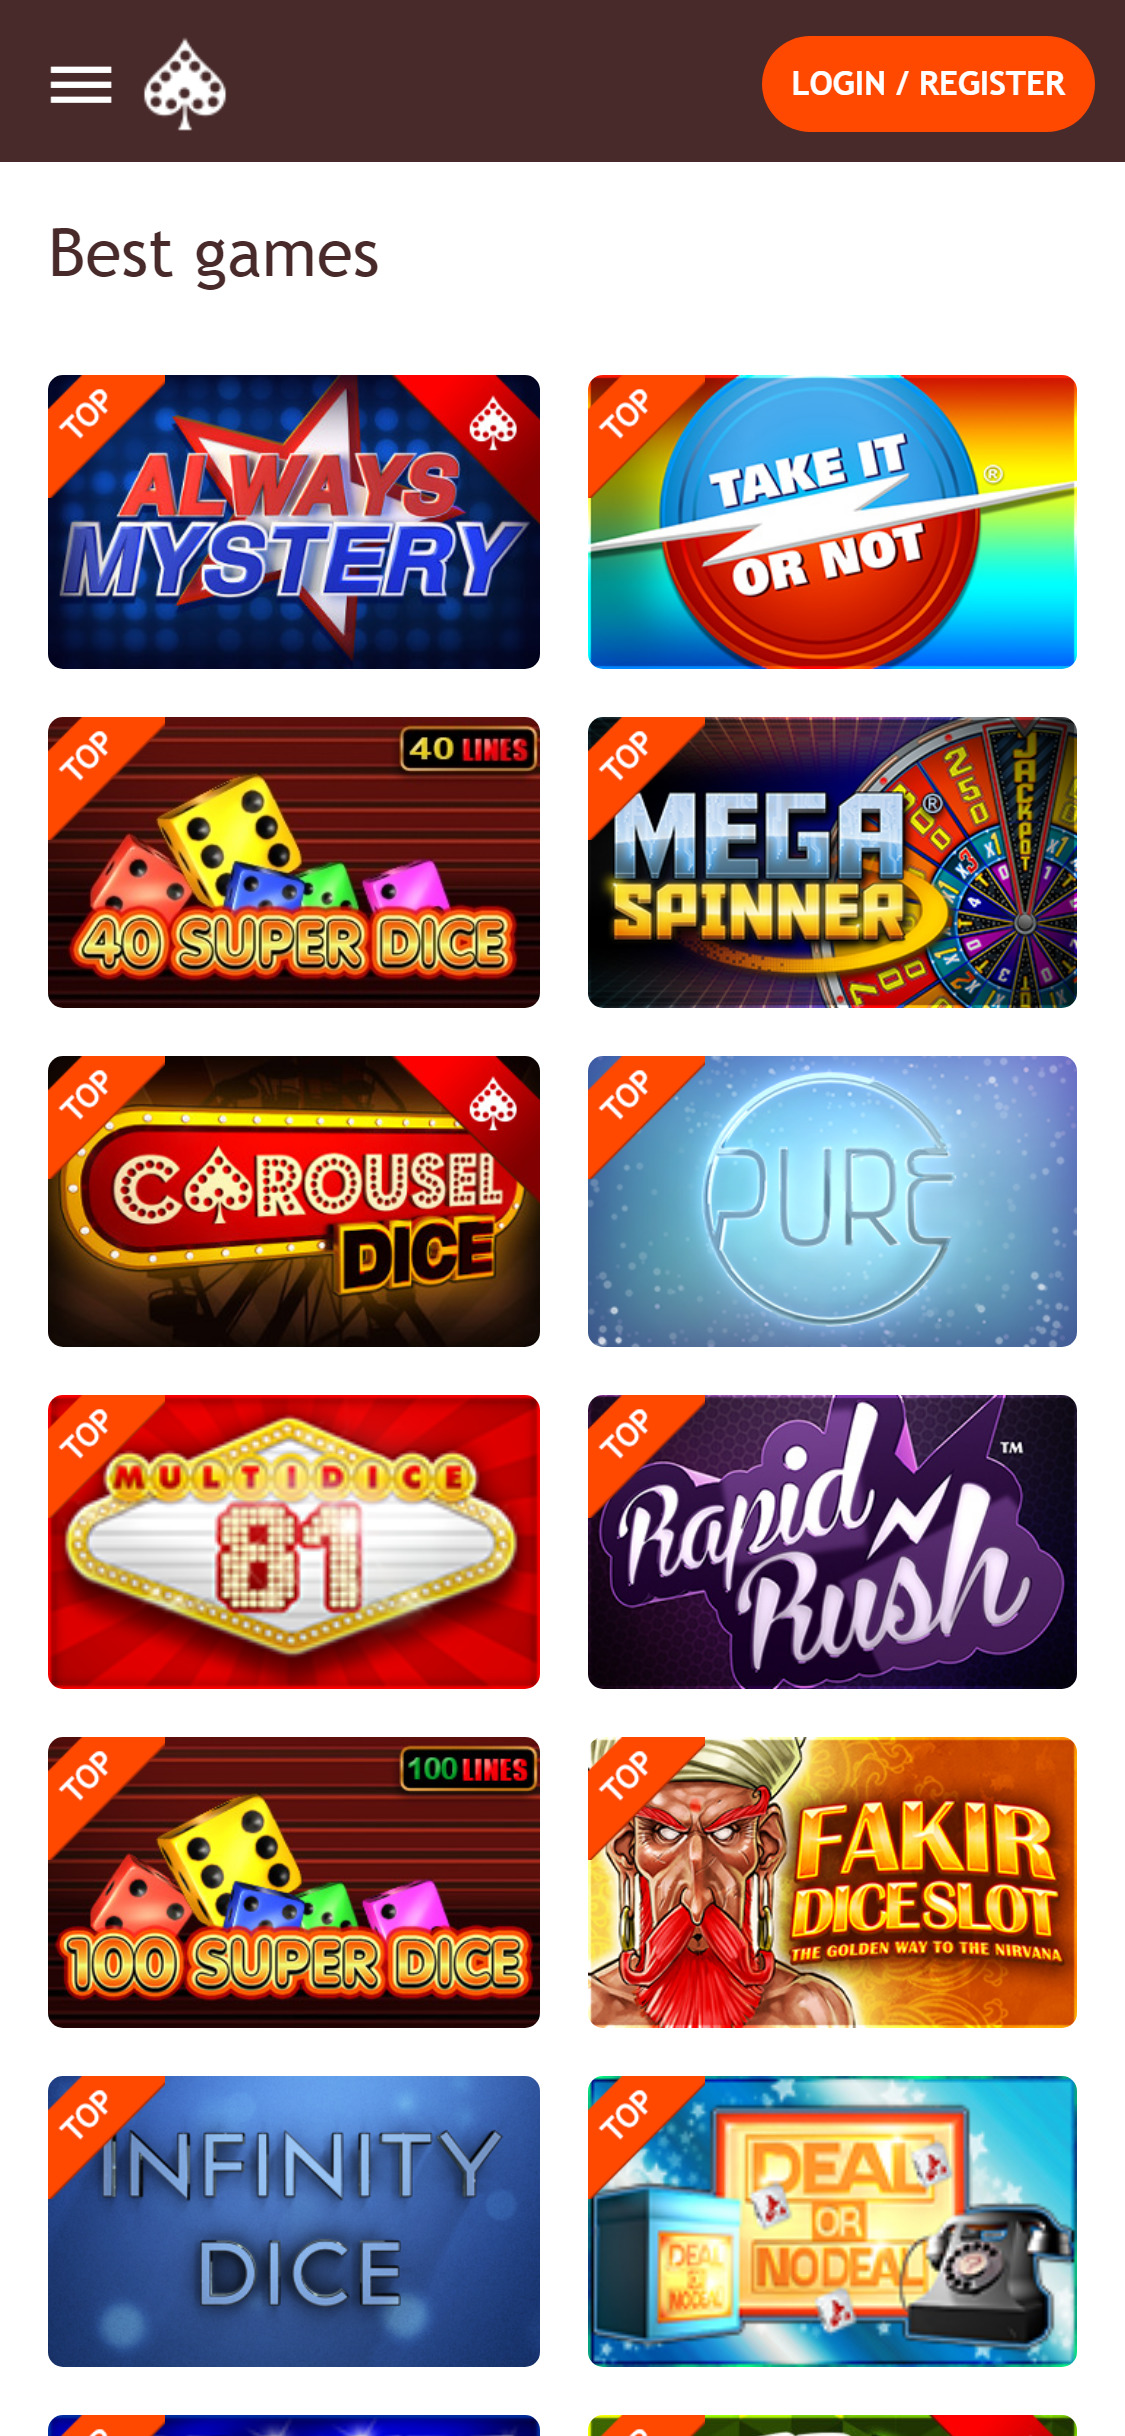 Carousel Mobile Games Review